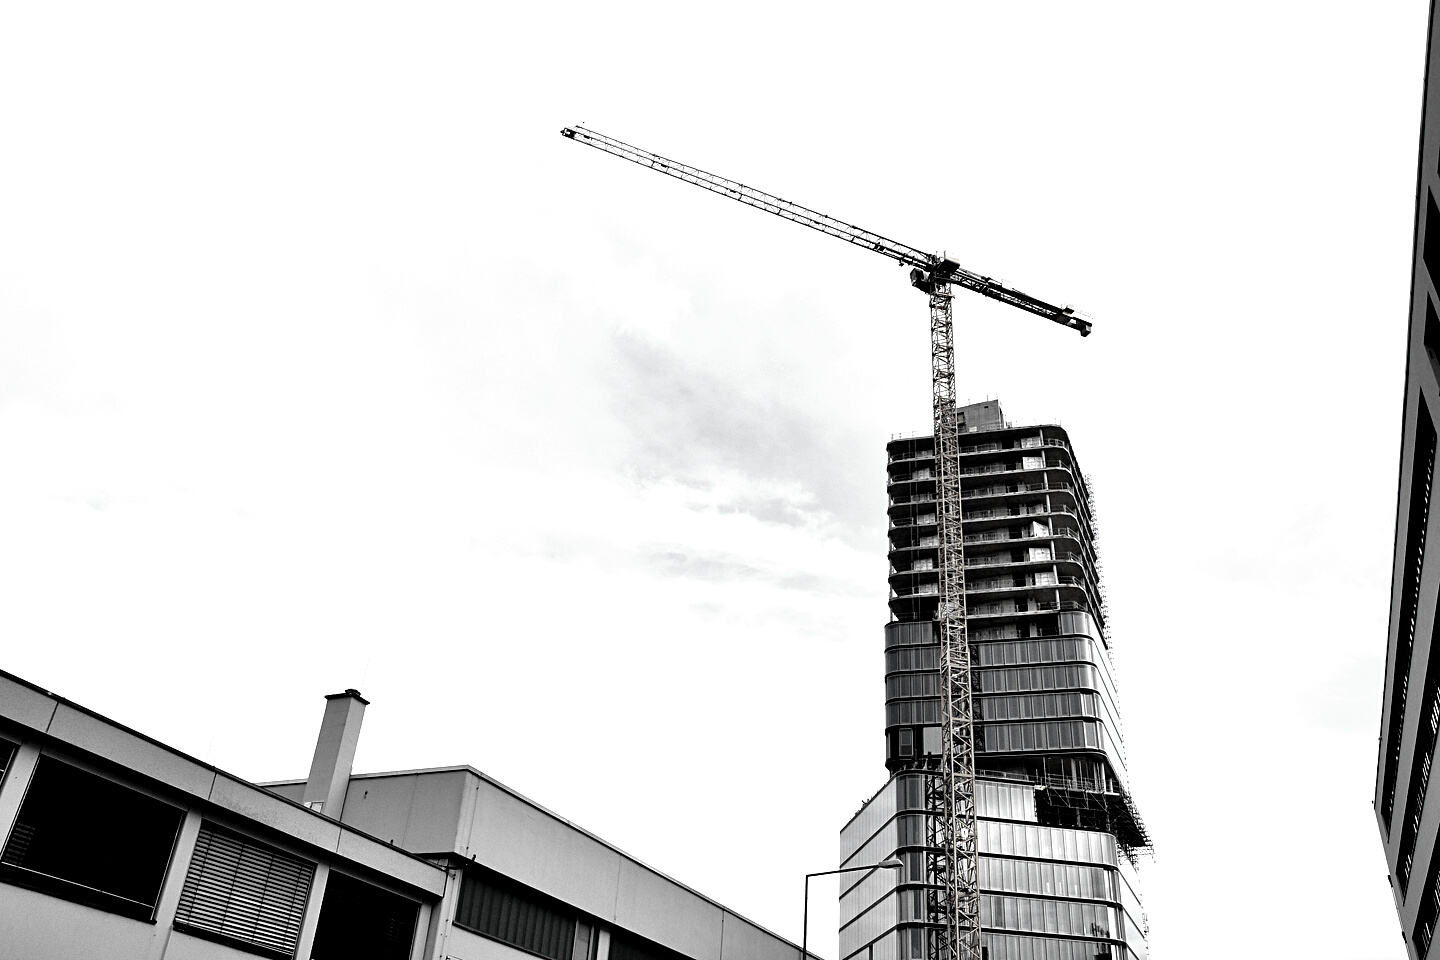 Yellow Tower Crane Beside the Concrete Building